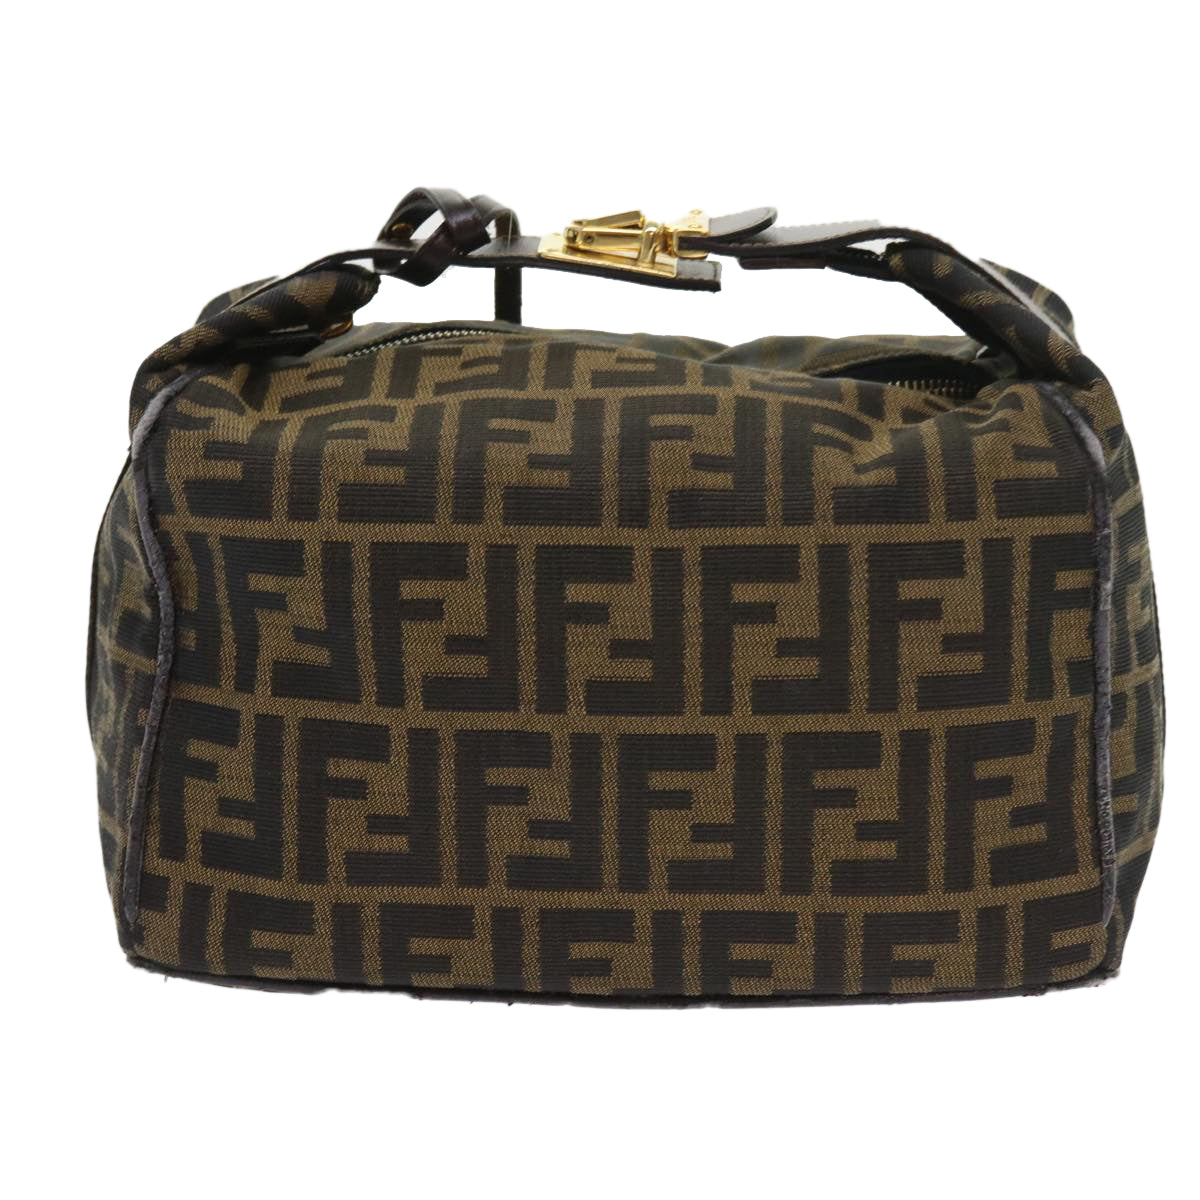 FENDI Zucca Canvas Vanity Cosmetic Pouch Black Brown Auth 57793